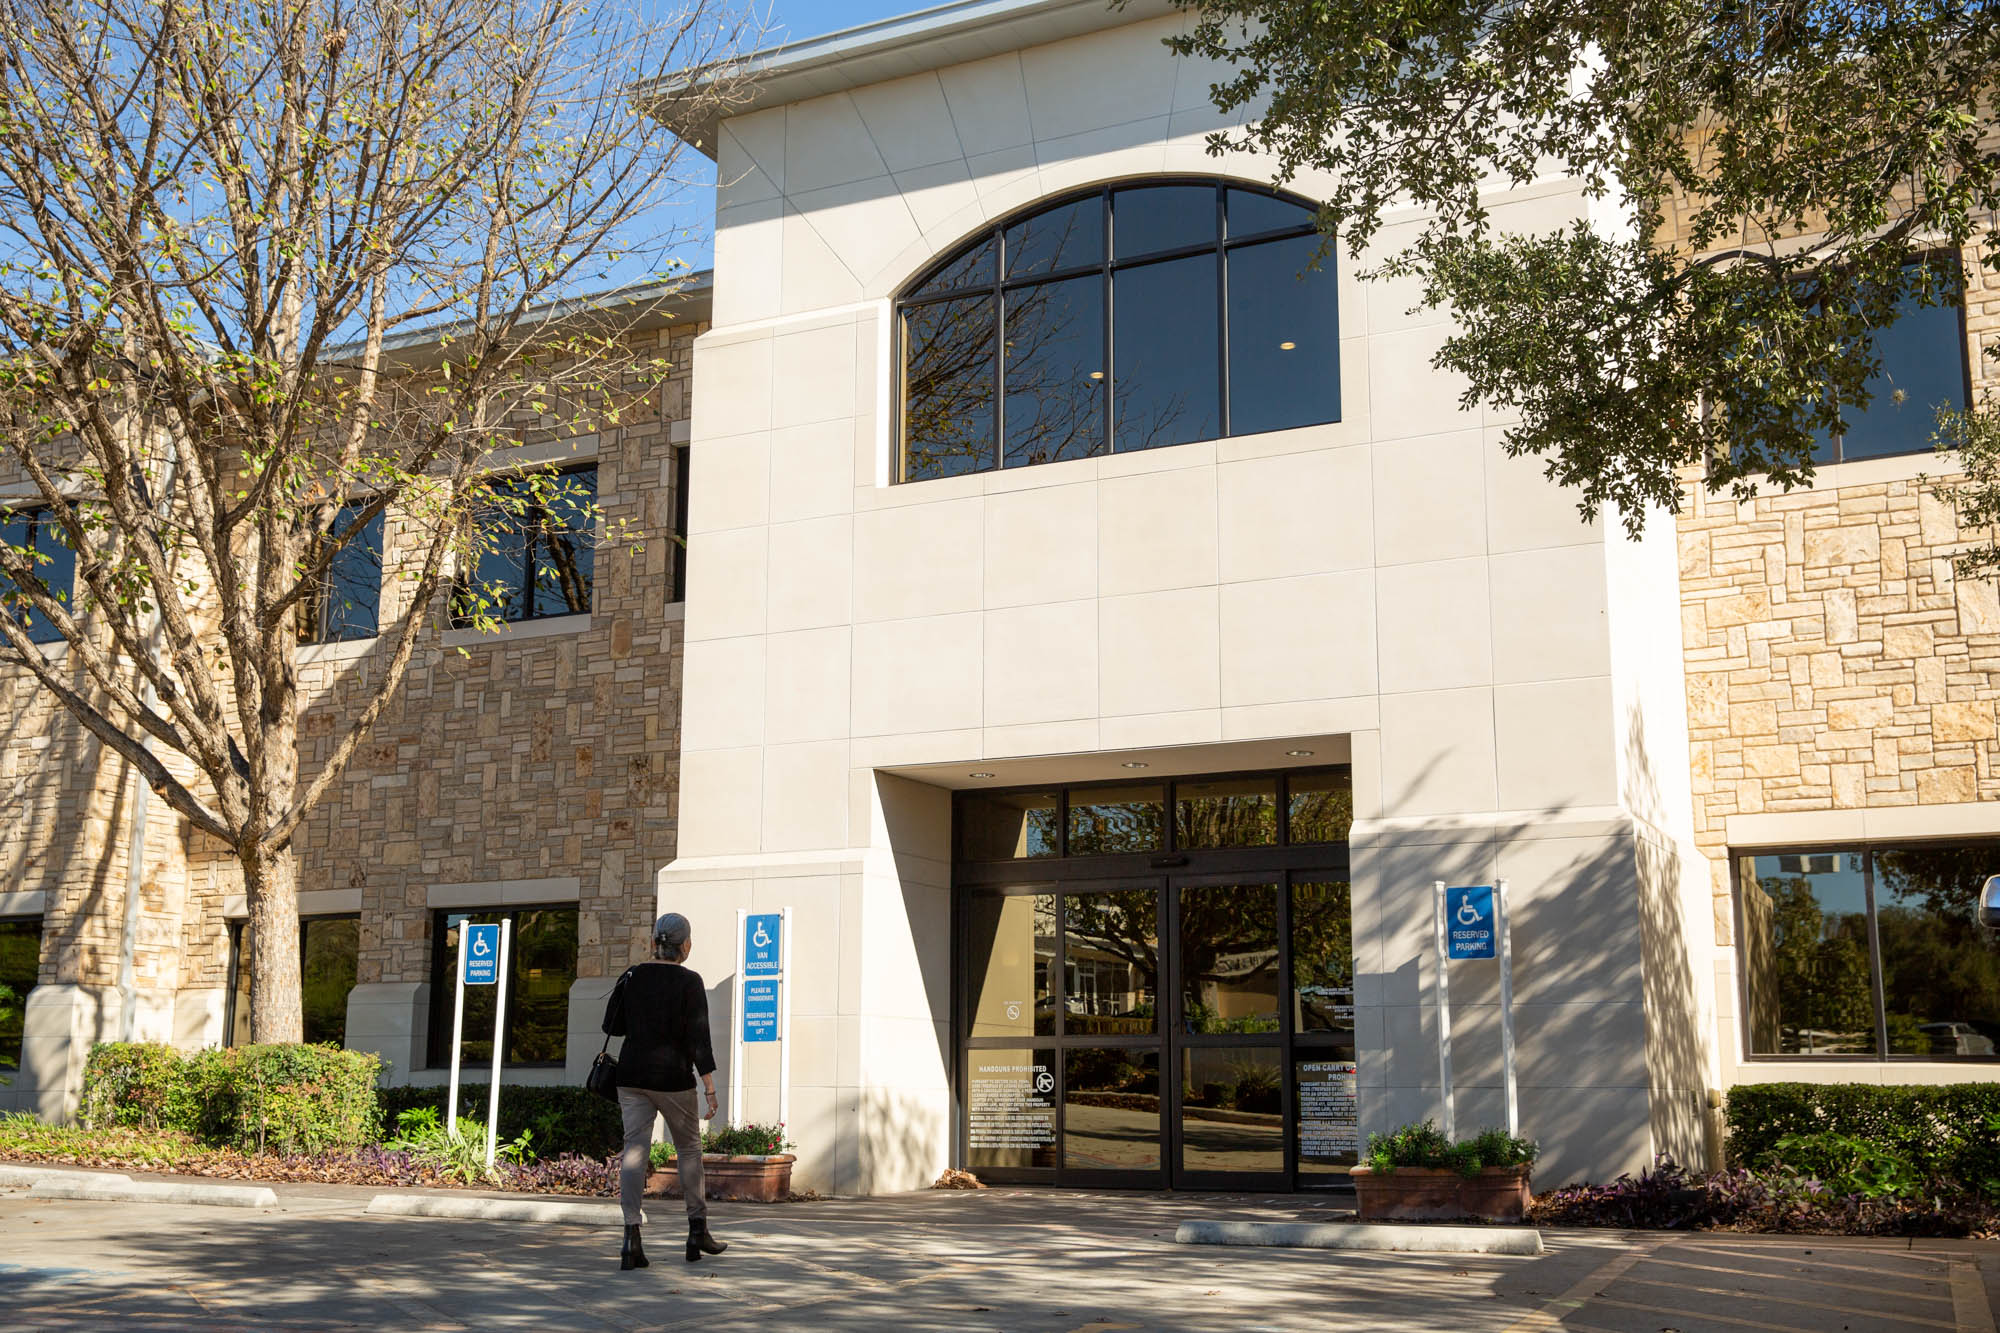 Exterior shot of Marcos Medical Care in San Antonio. The building is two stories made with light stone. Trees frame the entryway. A female client is walking to the doors.